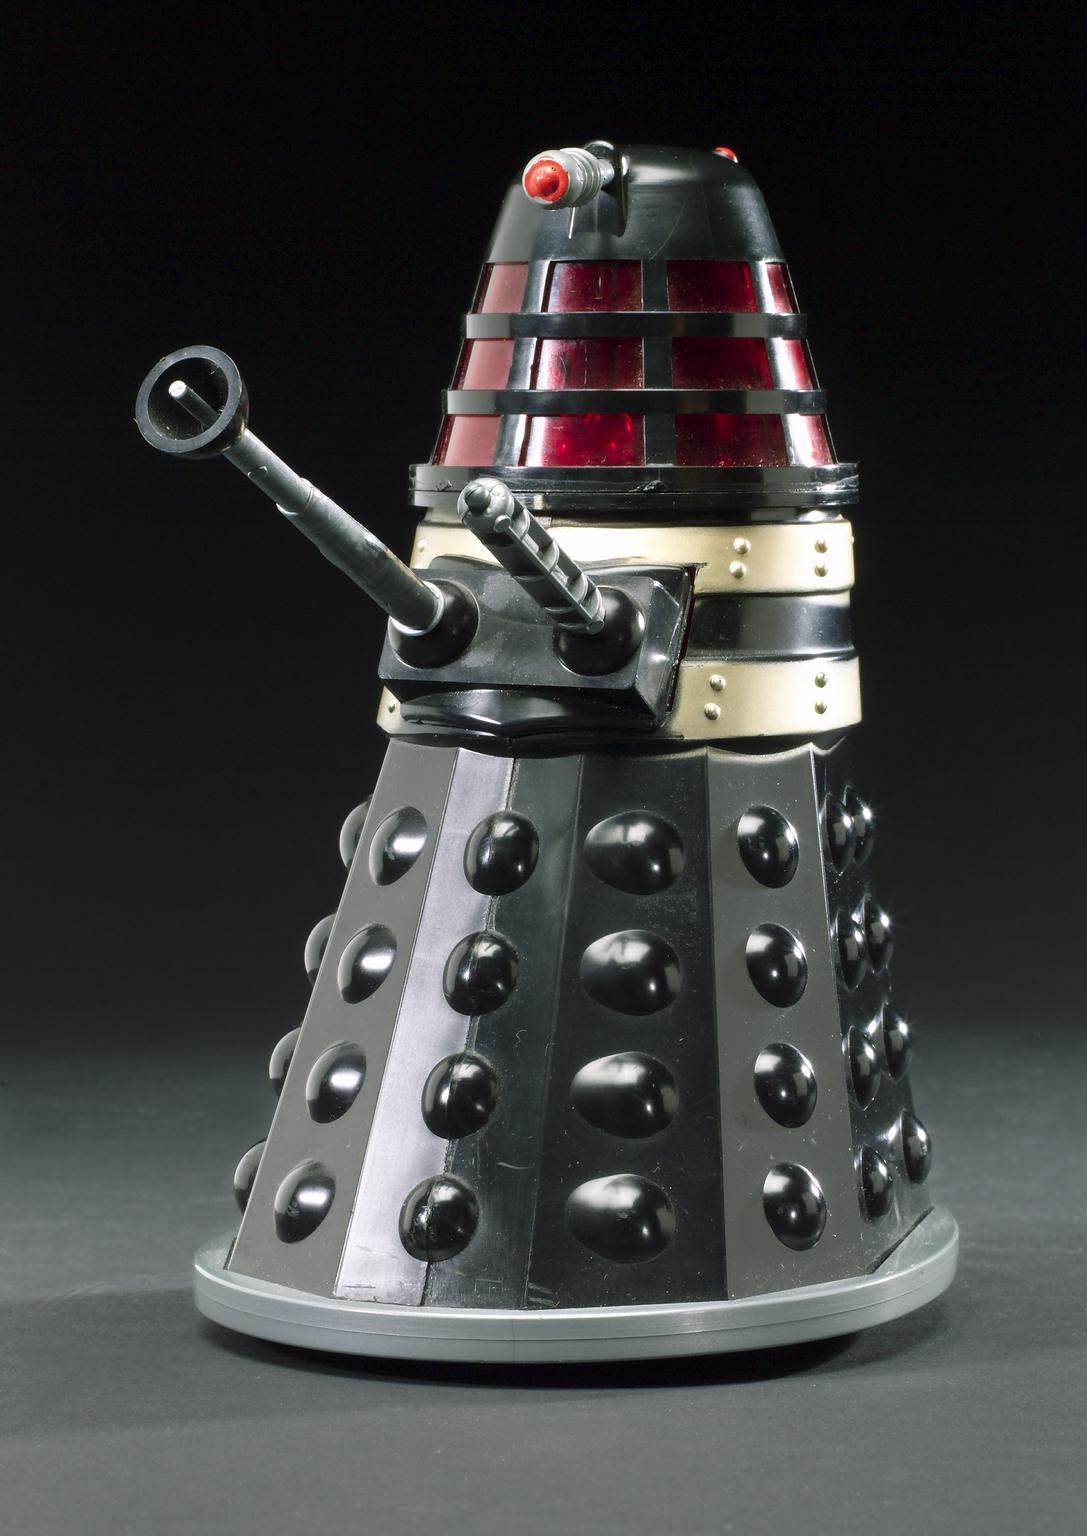 Toy 'Dalek' from the 'The Mysterious Daleks'. Made by Louis Marx & Co. Ltd., Swansea. c. 1966.